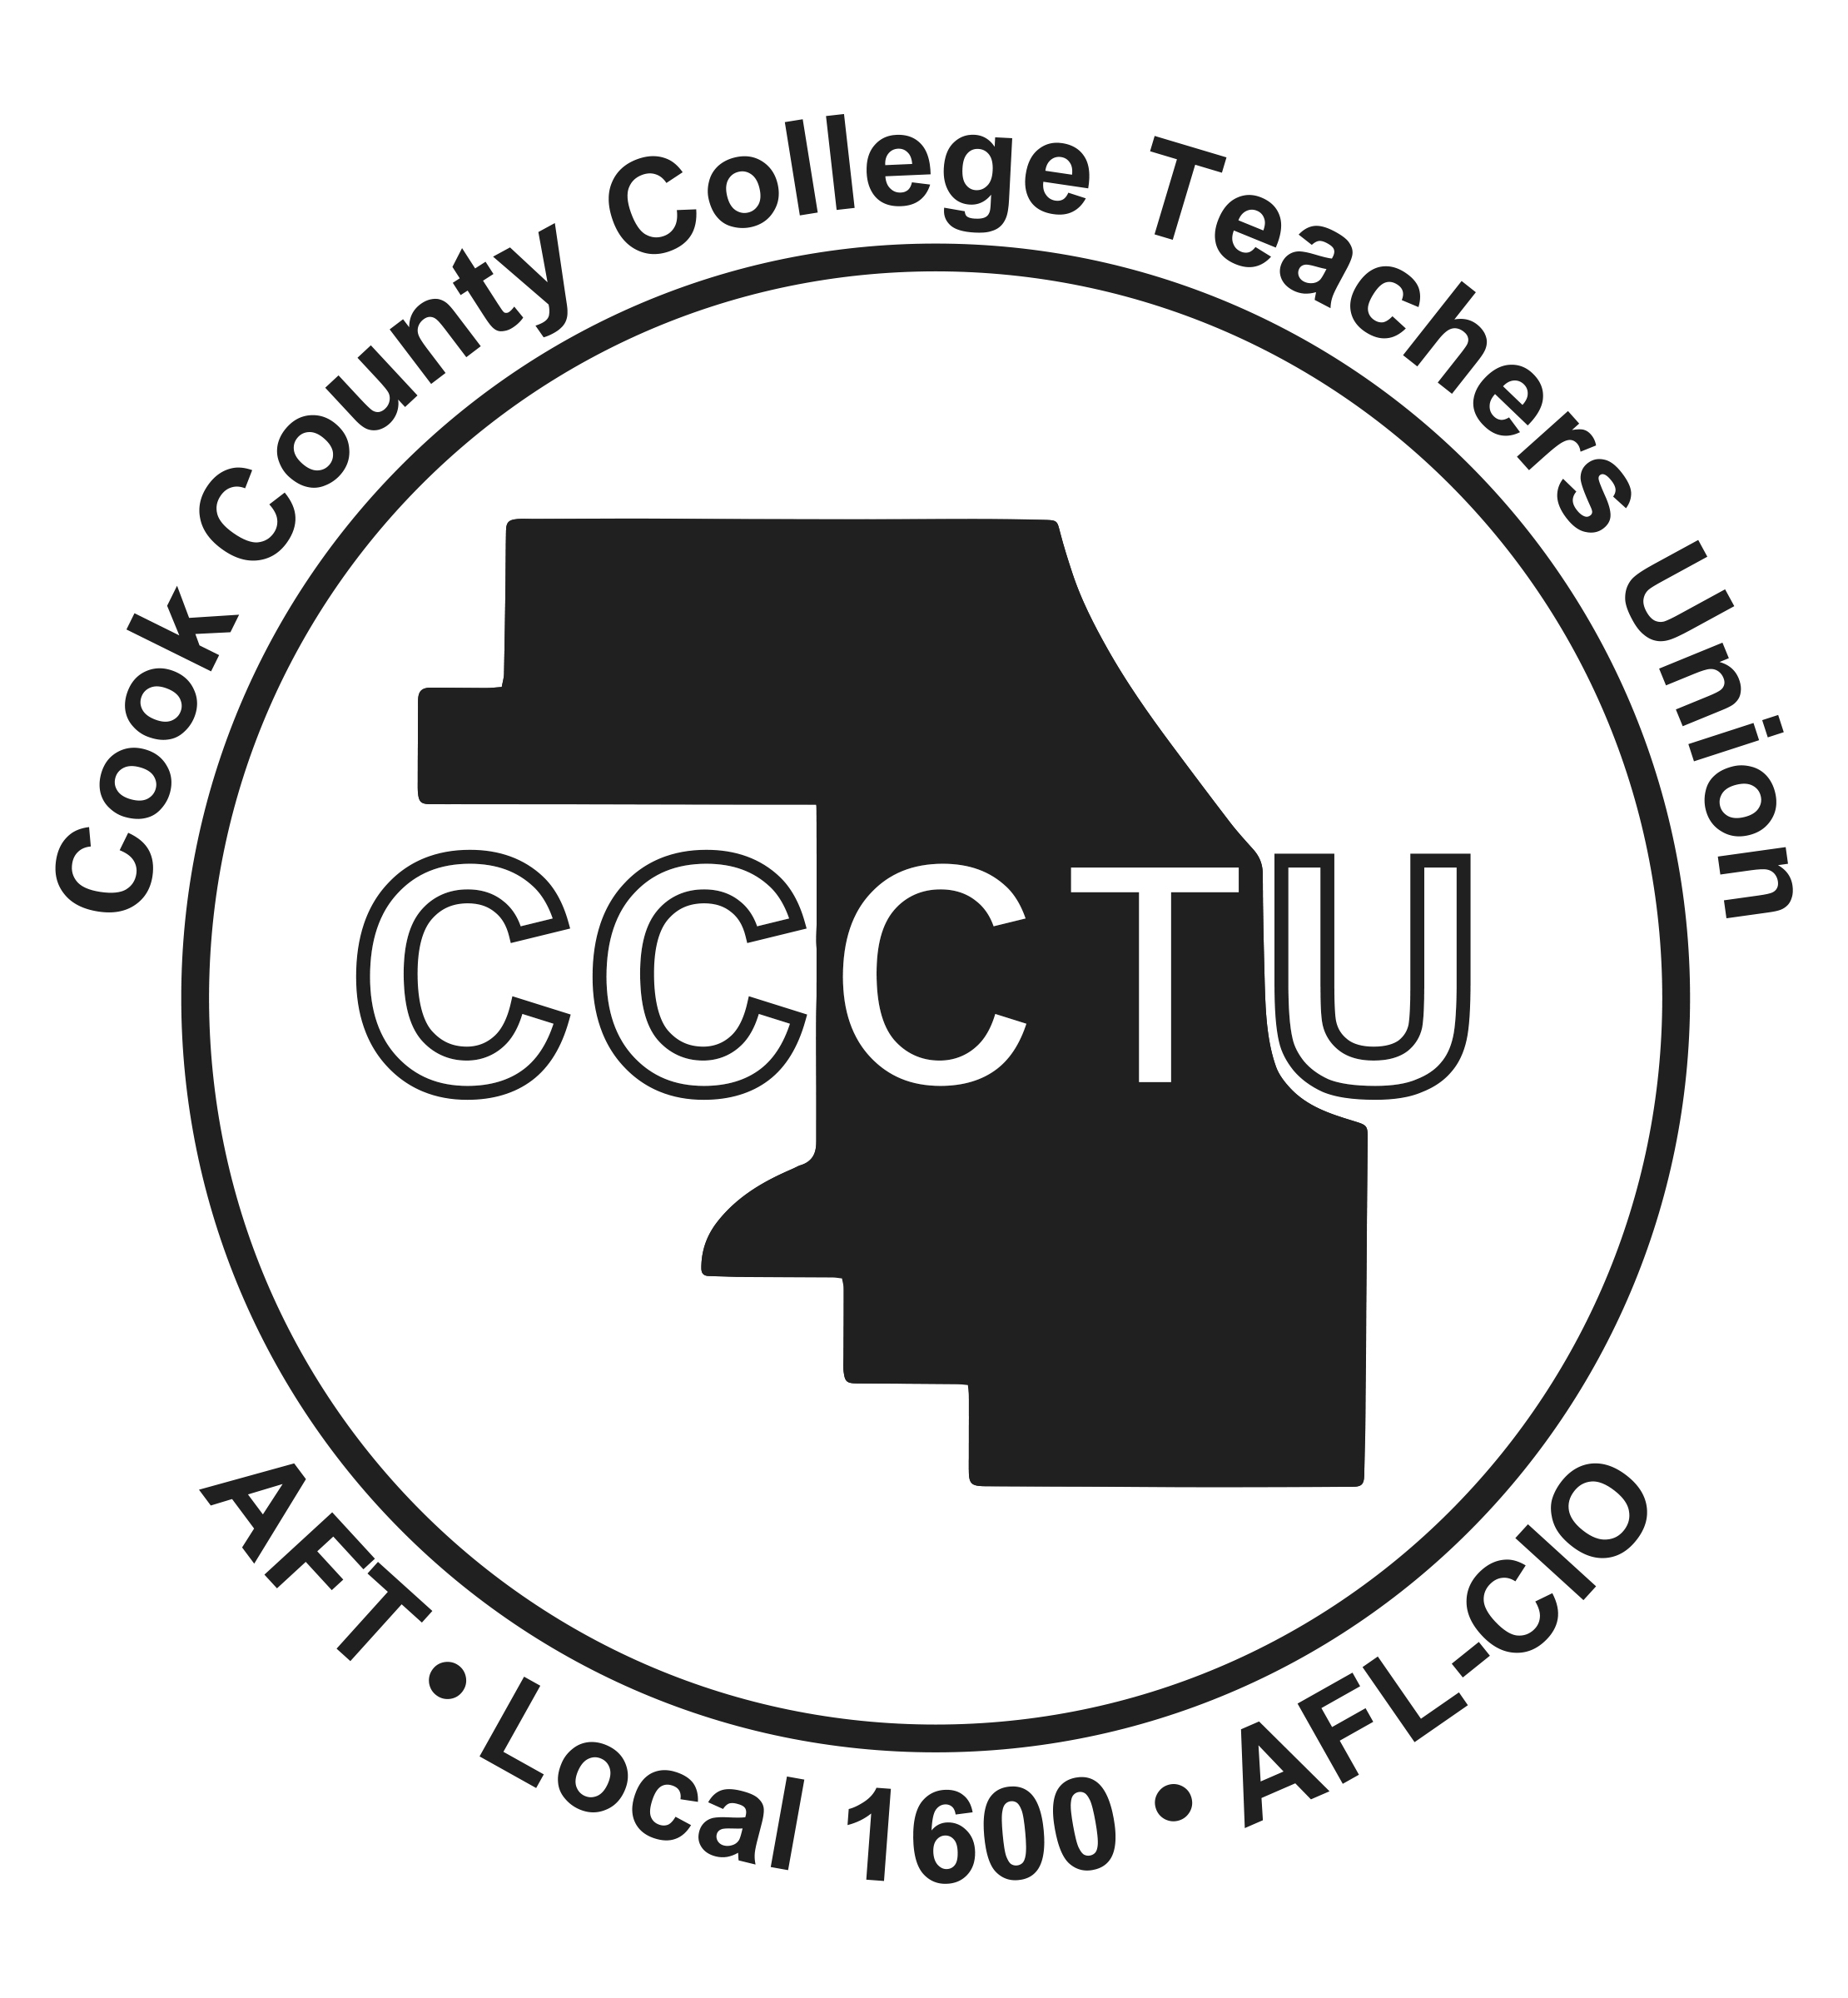 Cook County College Teachers Union Local 1600